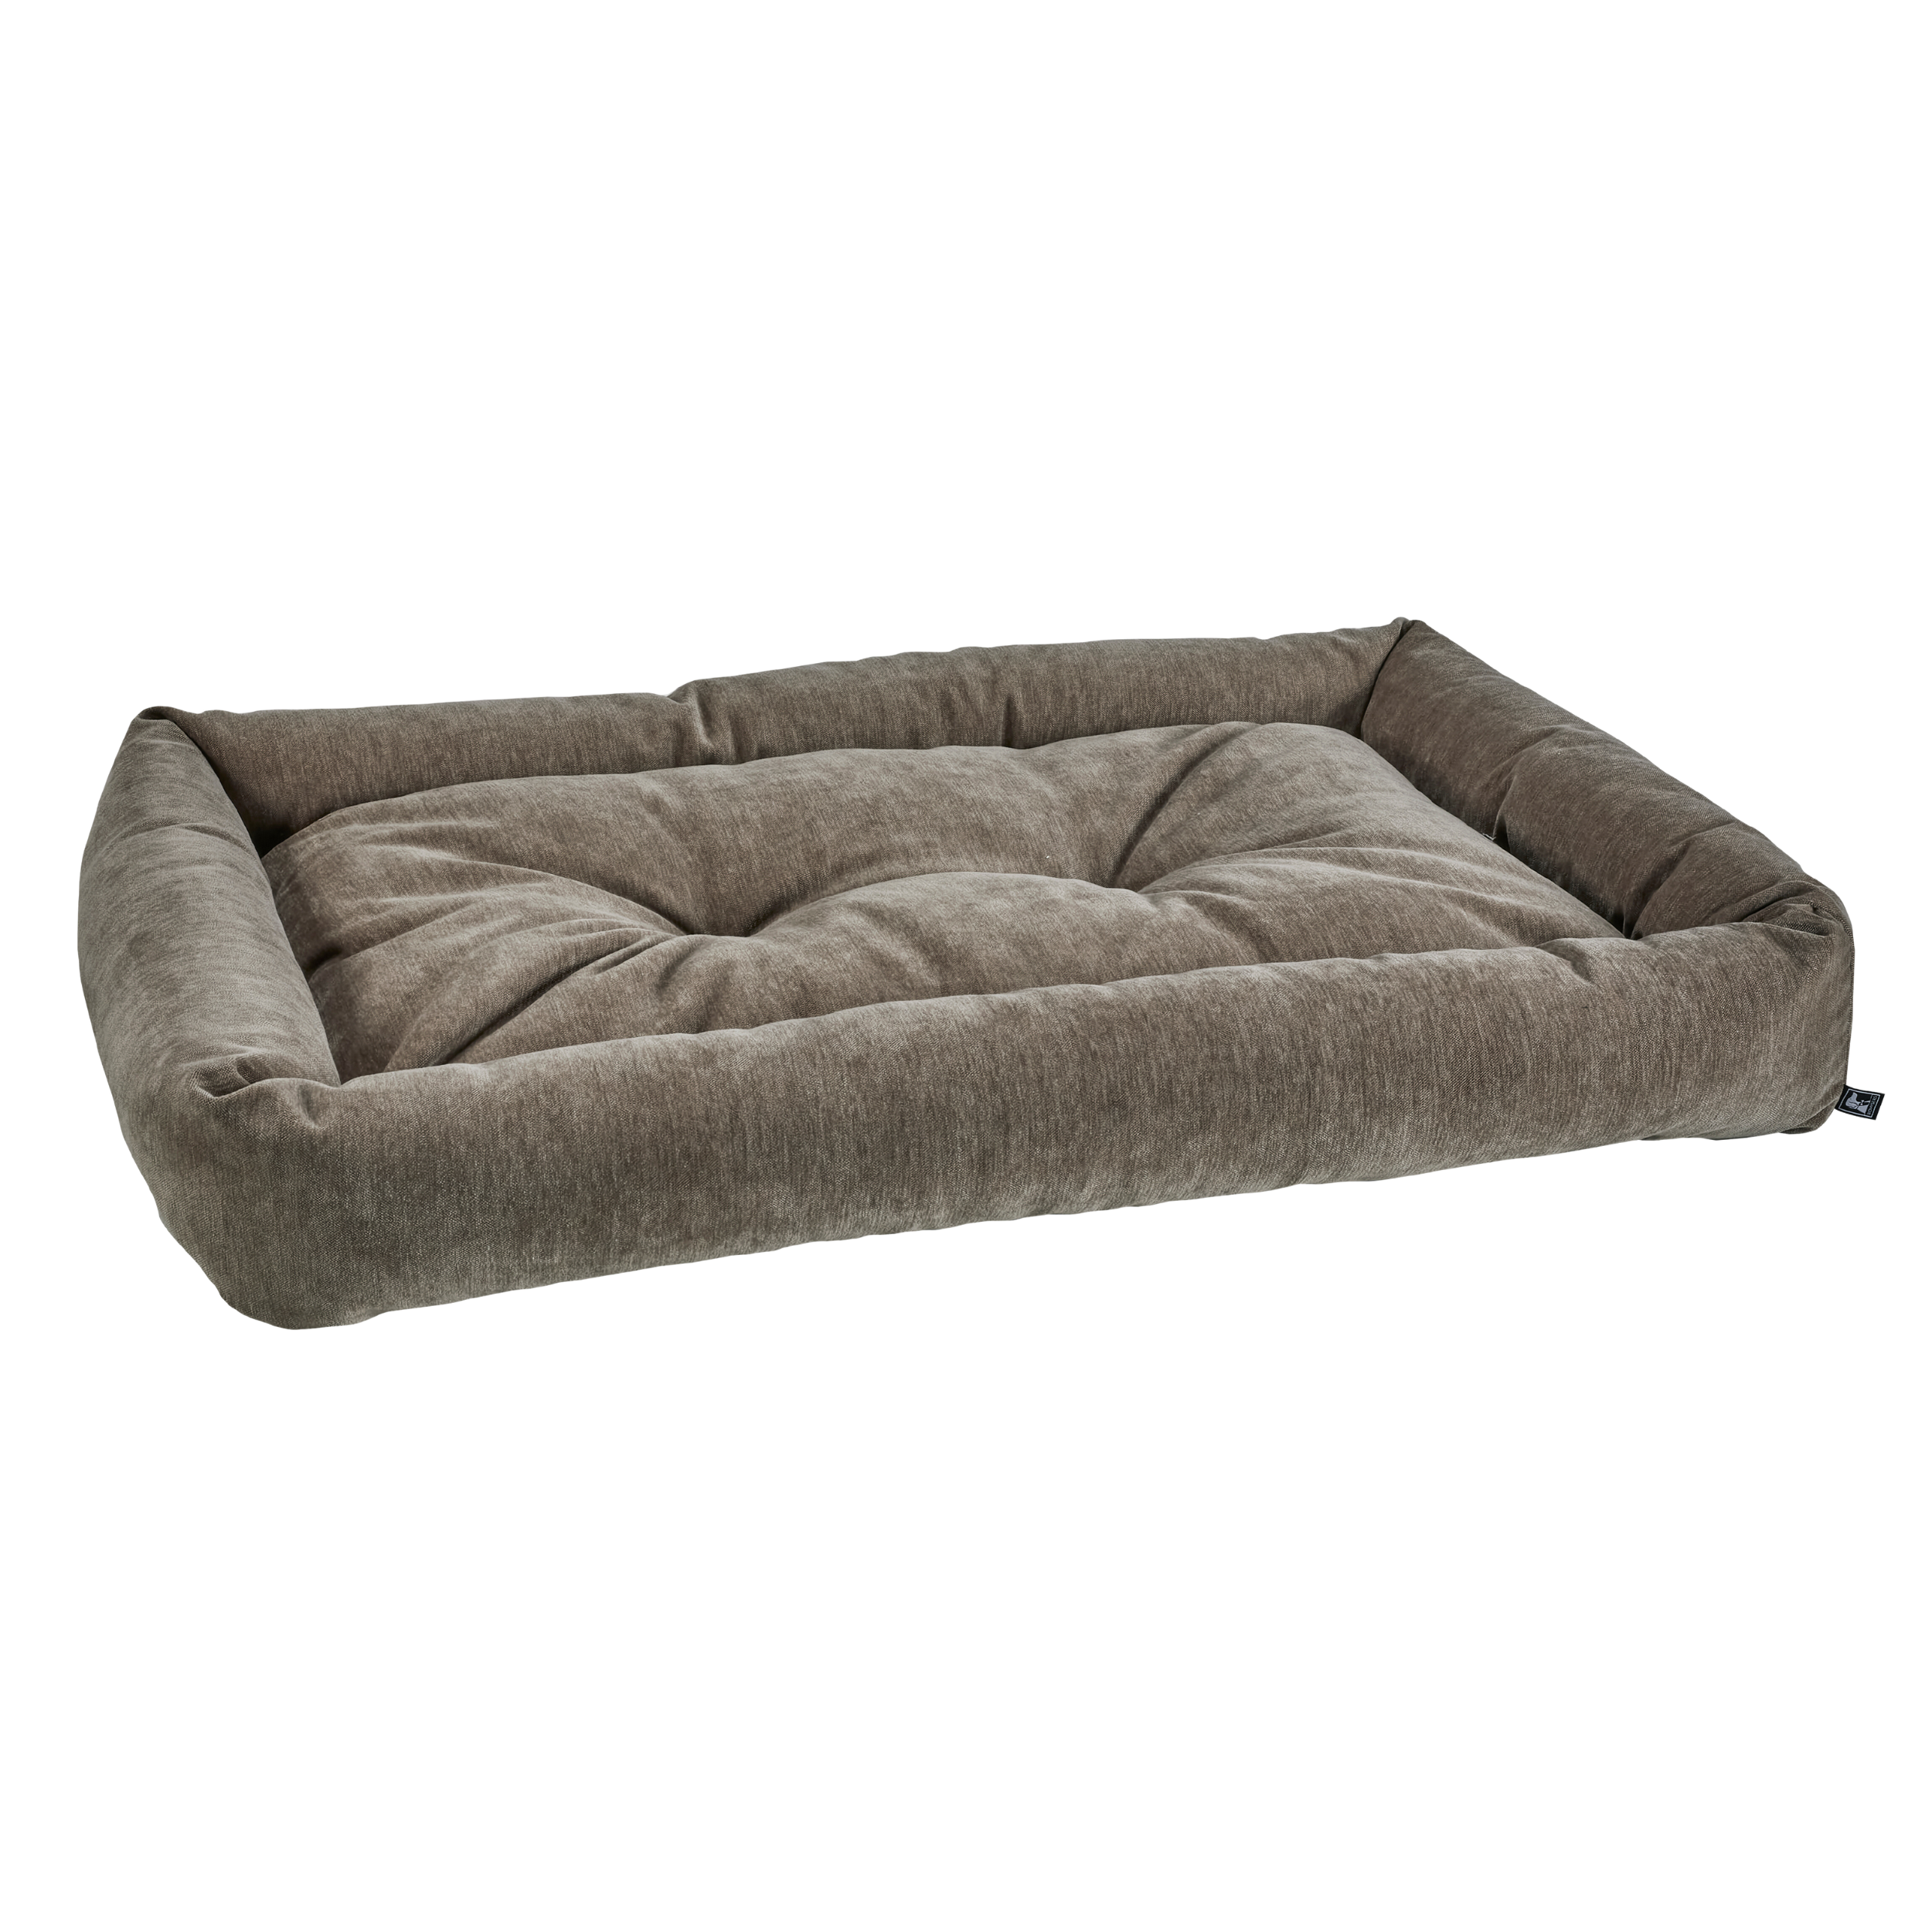 BARK-TANGO-DOG-BED-KENNEL-CRATE-MAT